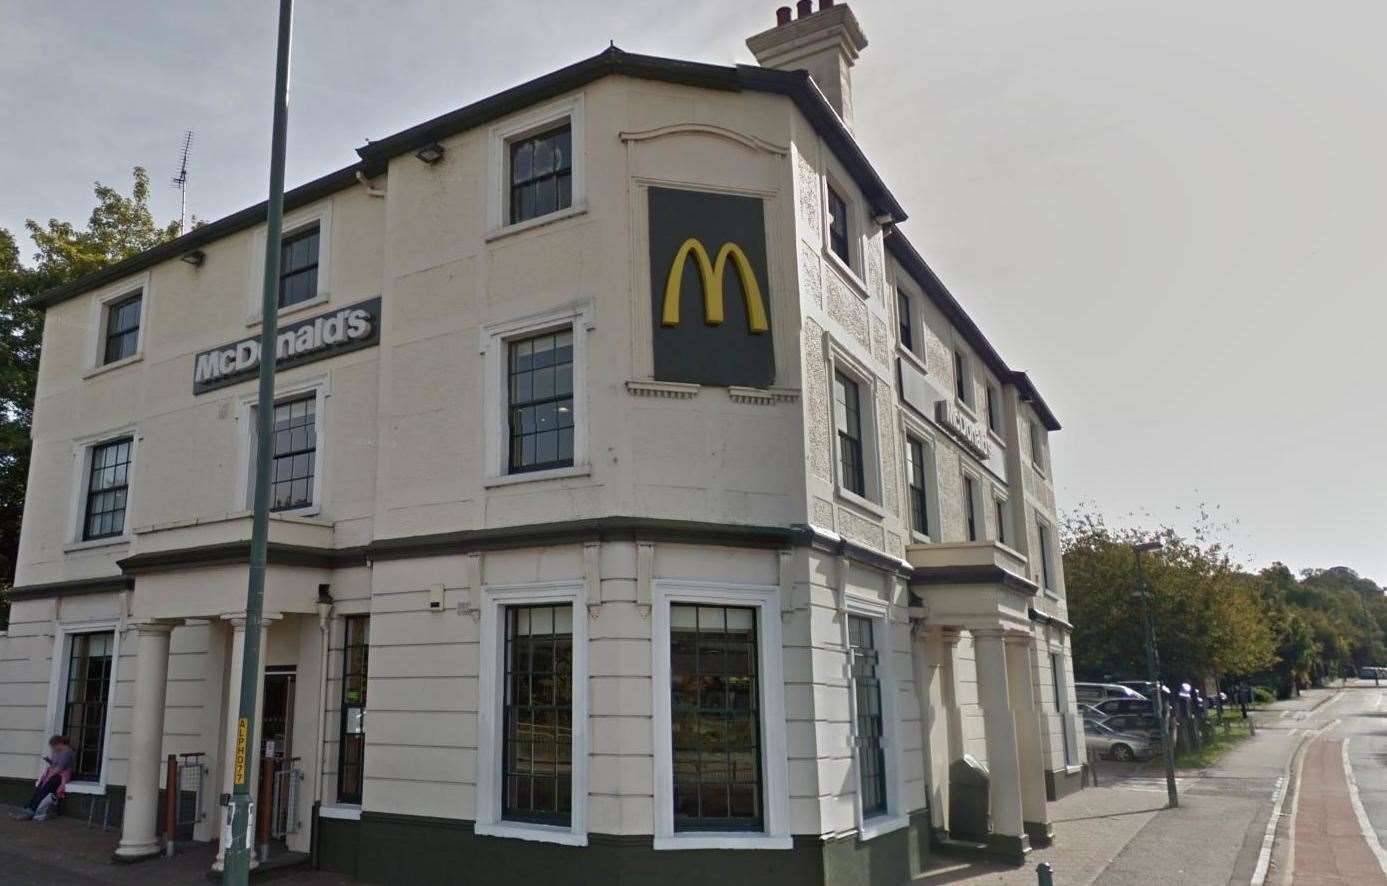 The McDonald's in London Road, Greenhithe, formerly the Railway Tavern where Simon was left as a baby.